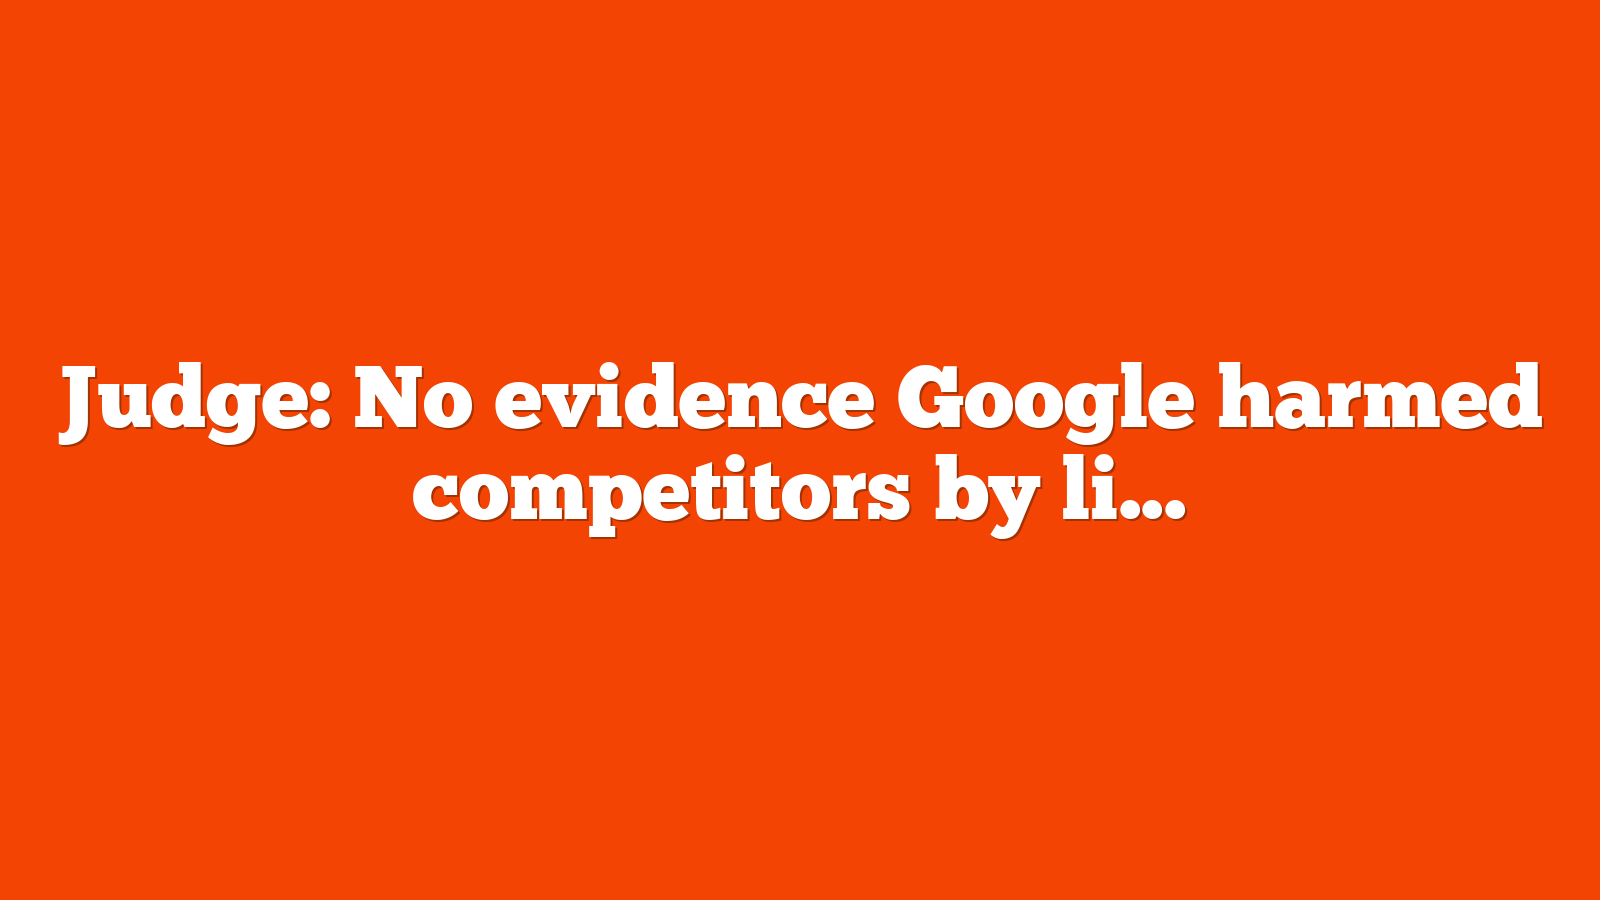 Judge No evidence Google harmed competitors by limiting search visibility